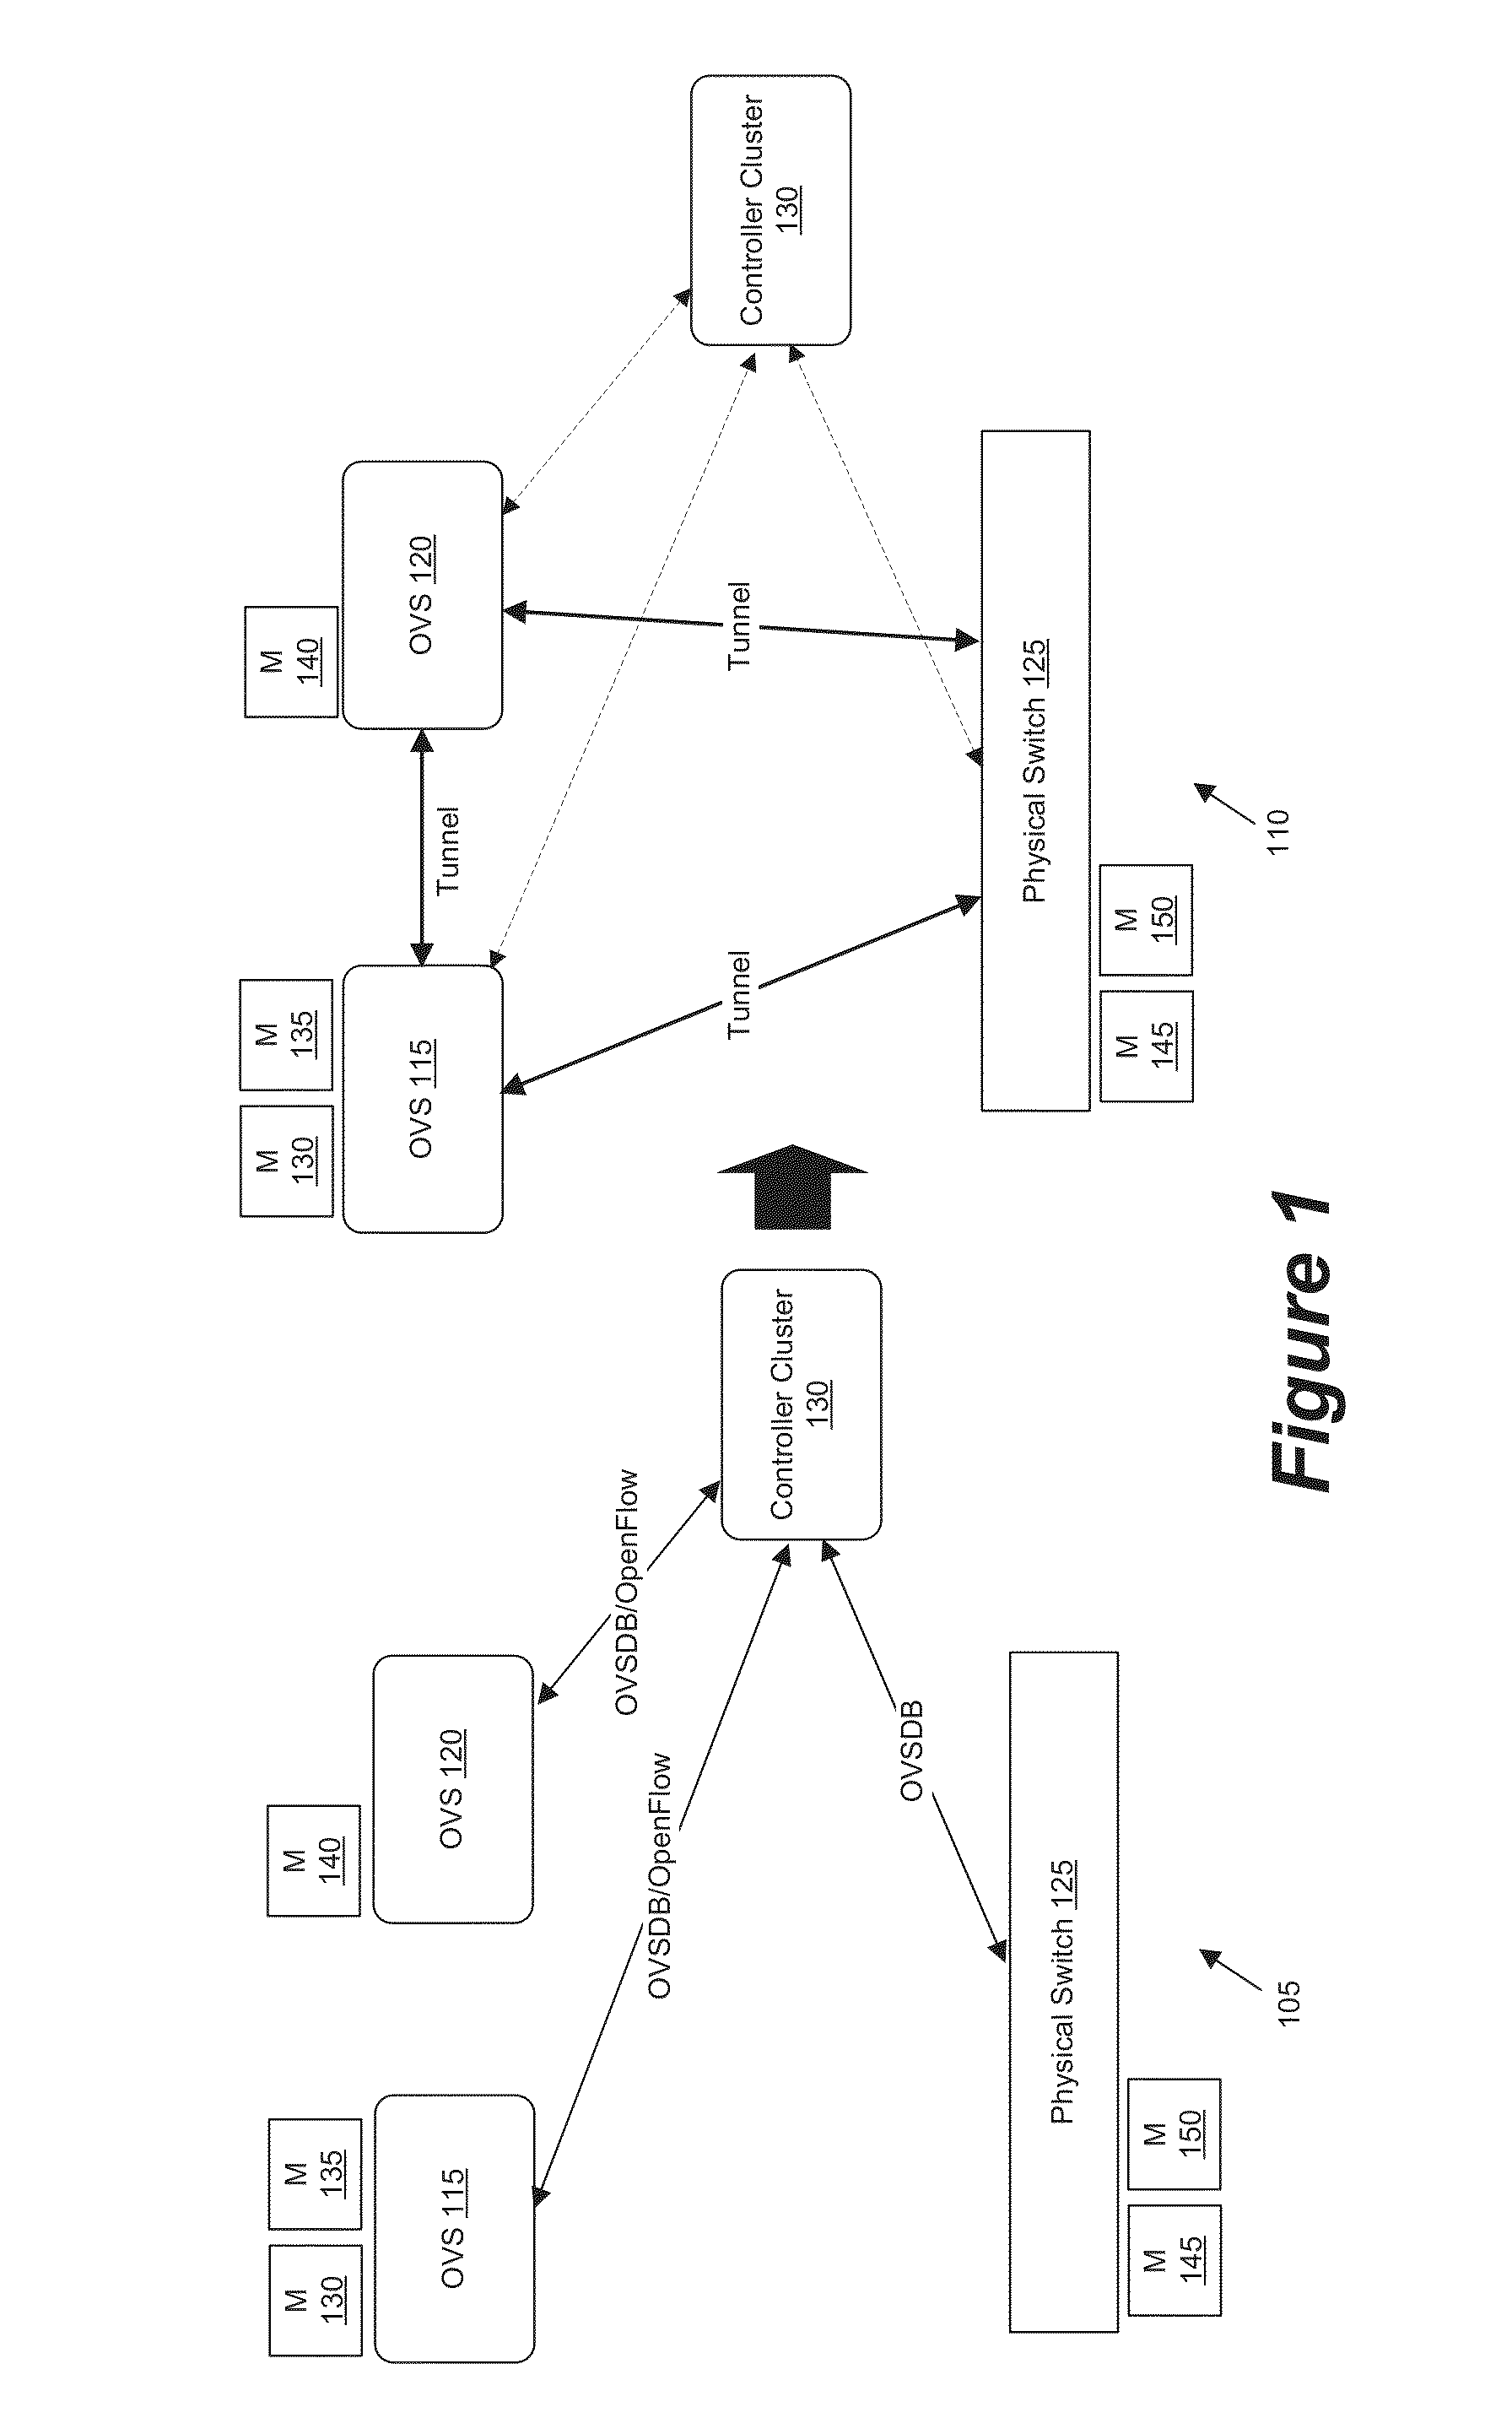 Managing Software and Hardware Forwarding Elements to Define Virtual Networks